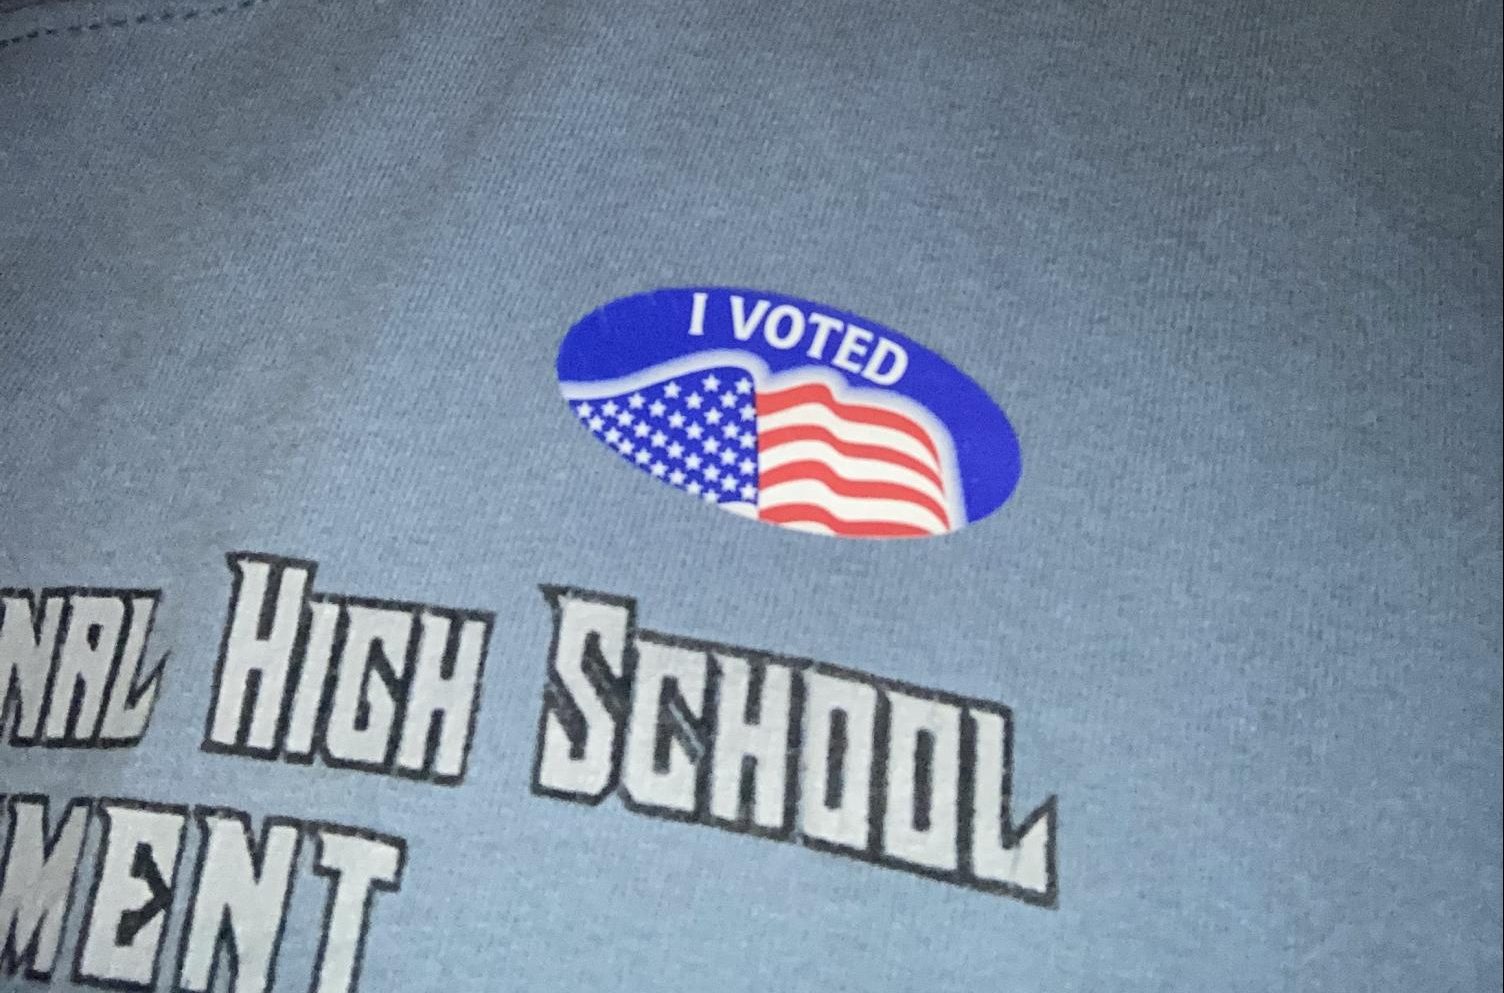 Voters around the country proudly wear their I Voted stickers after exercising their American right to vote.